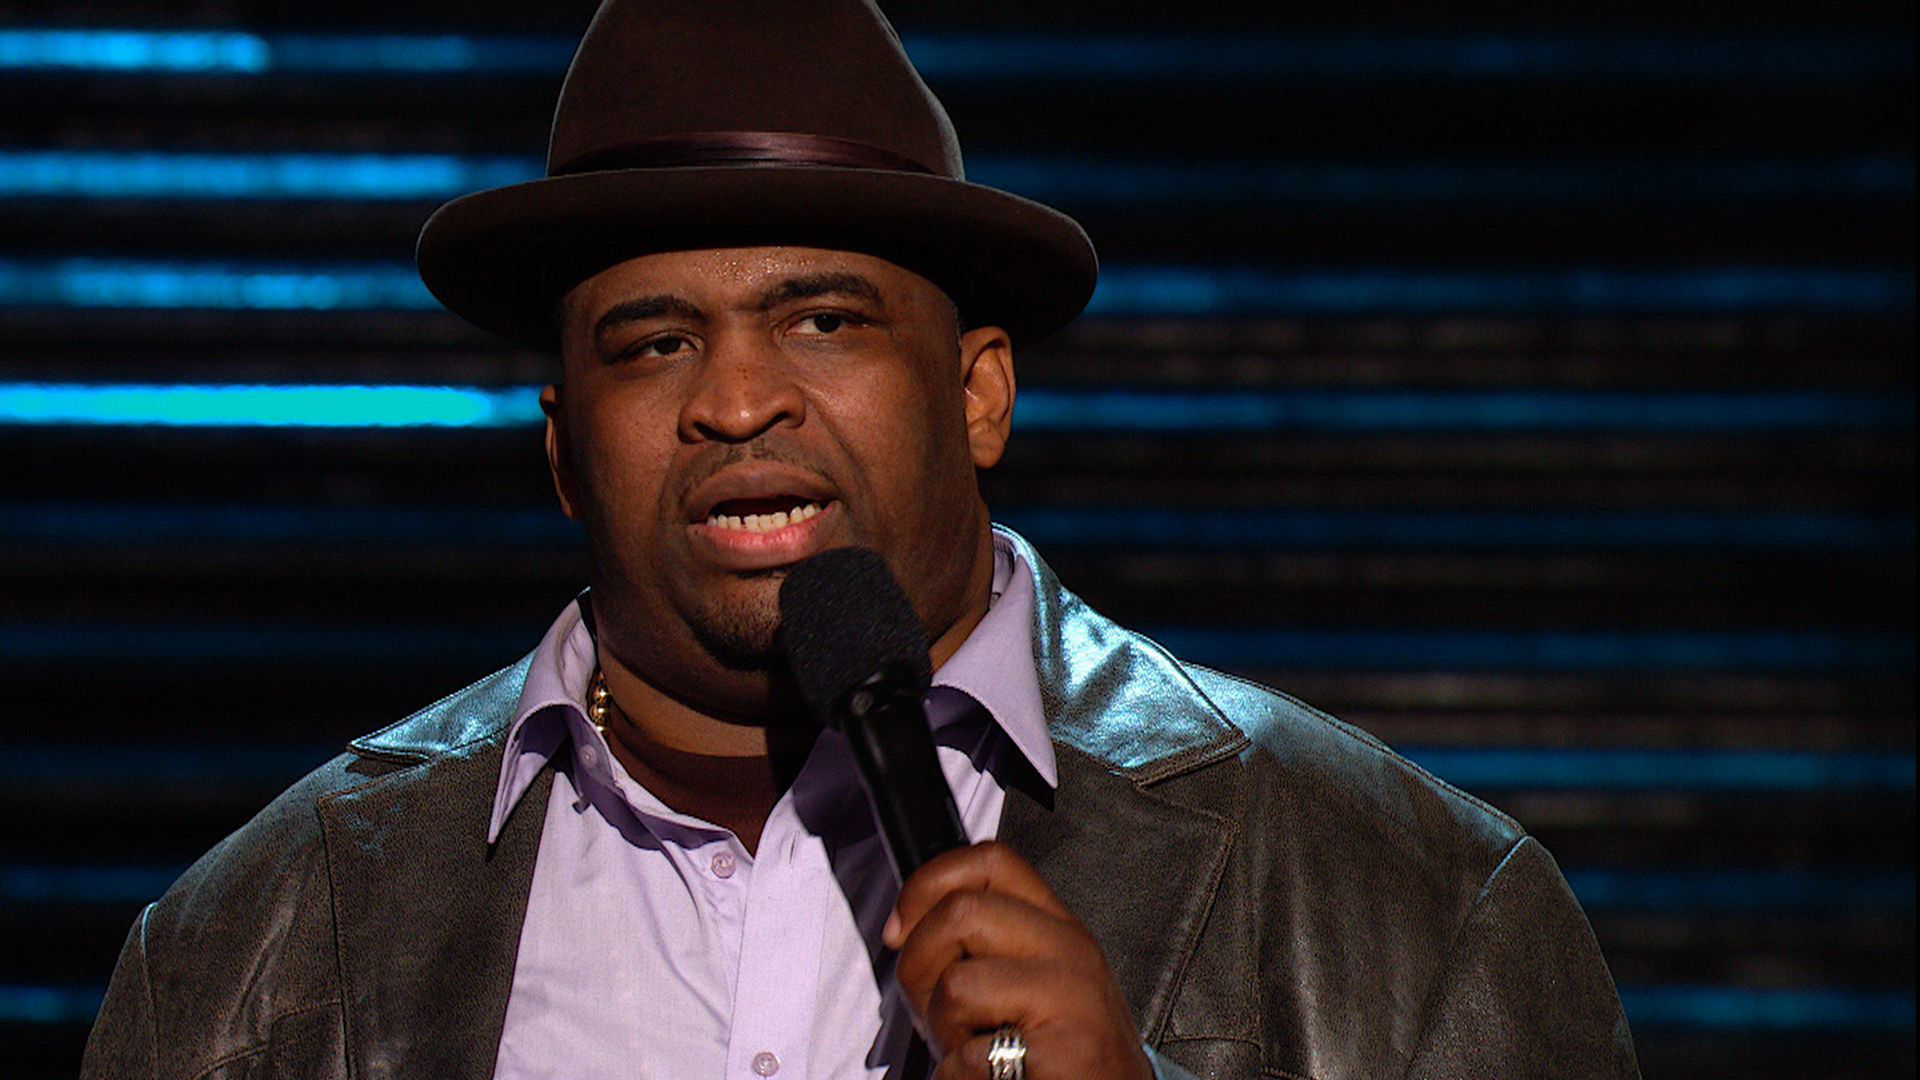 Patrice O'neal def belongs on that list. punky brewster. 